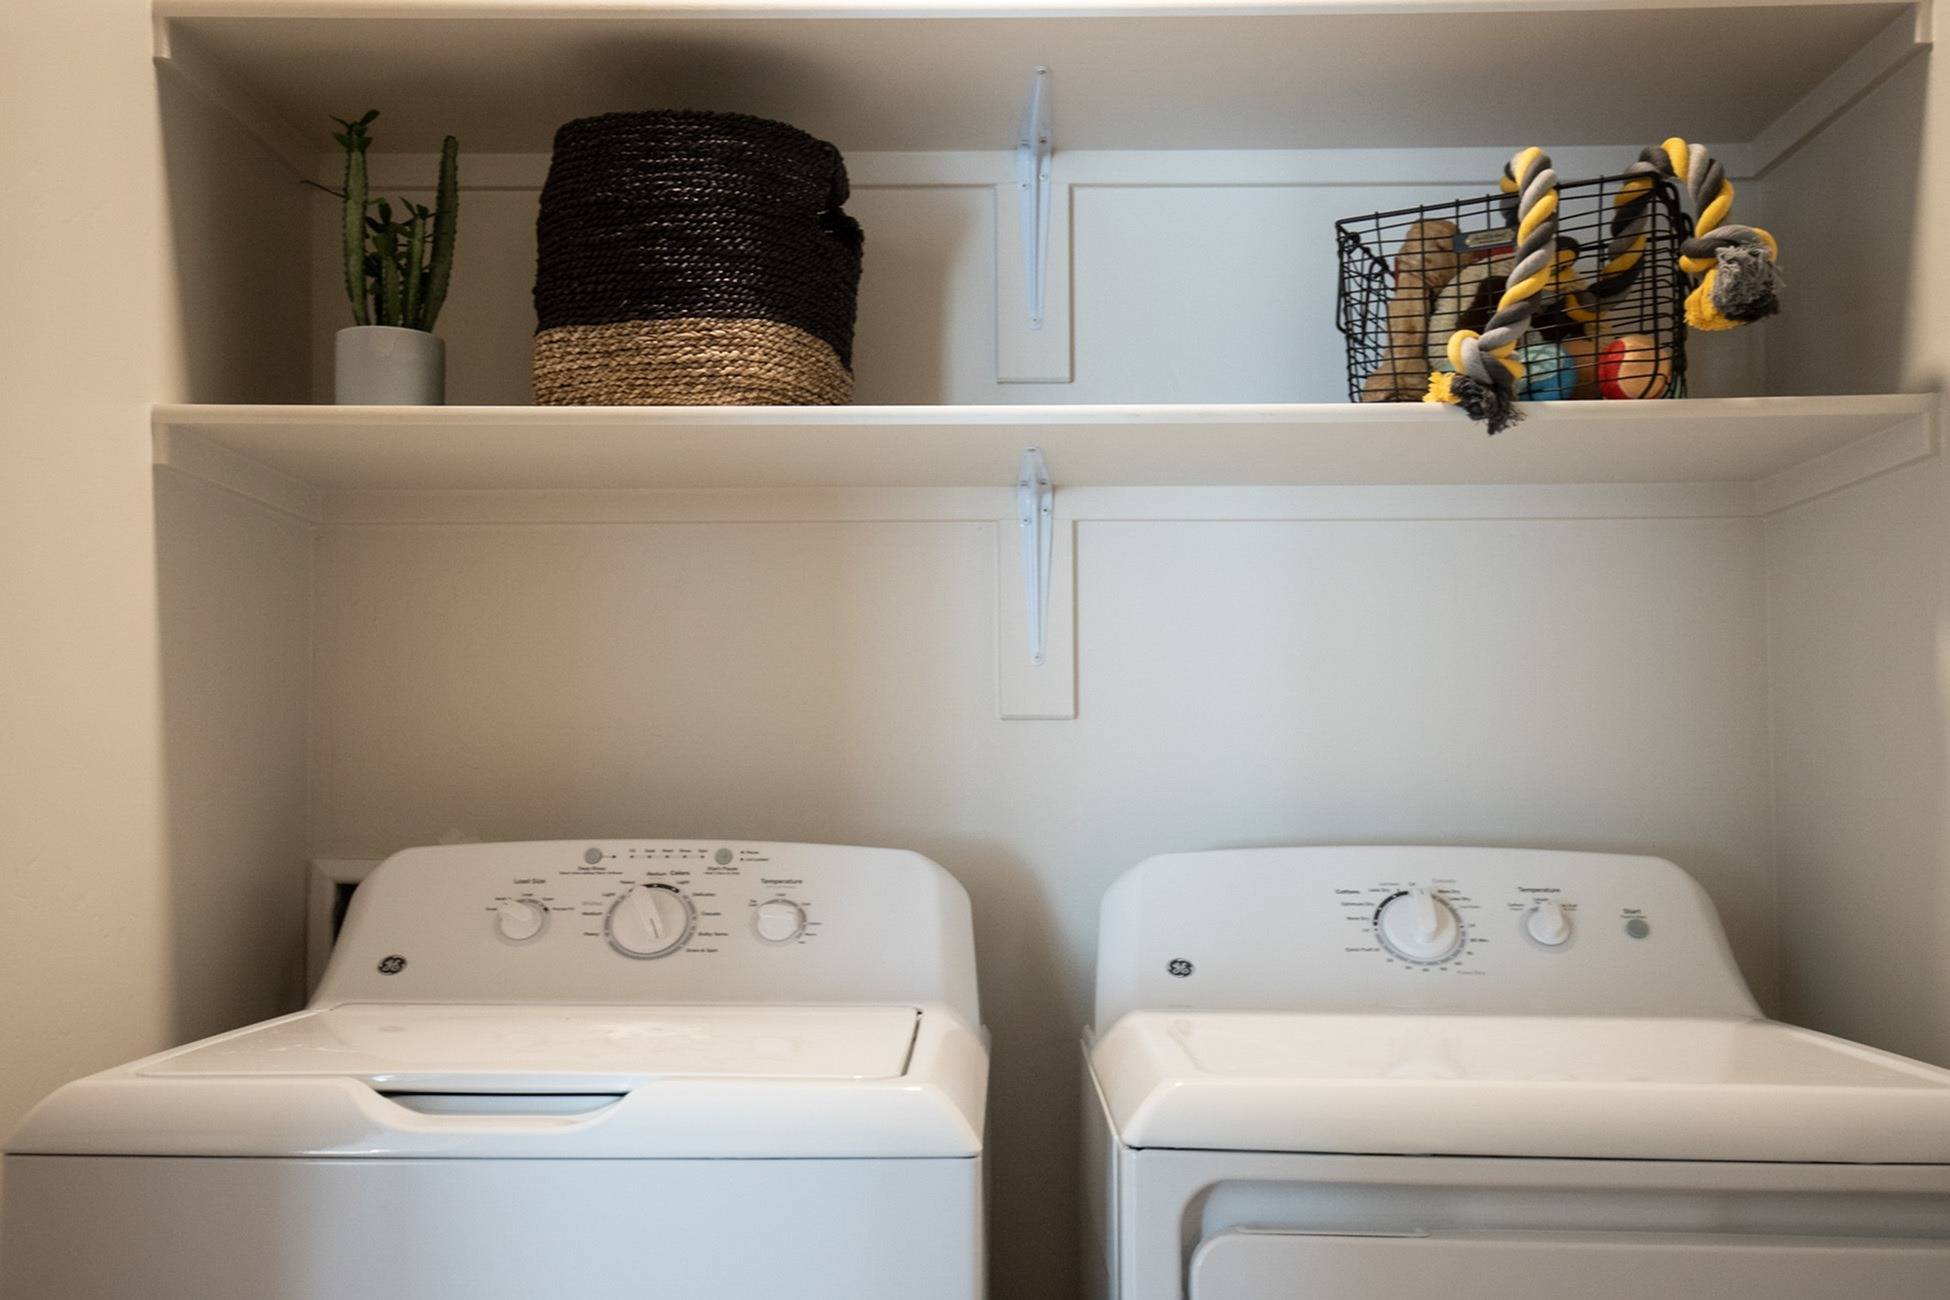 in-unit laundry